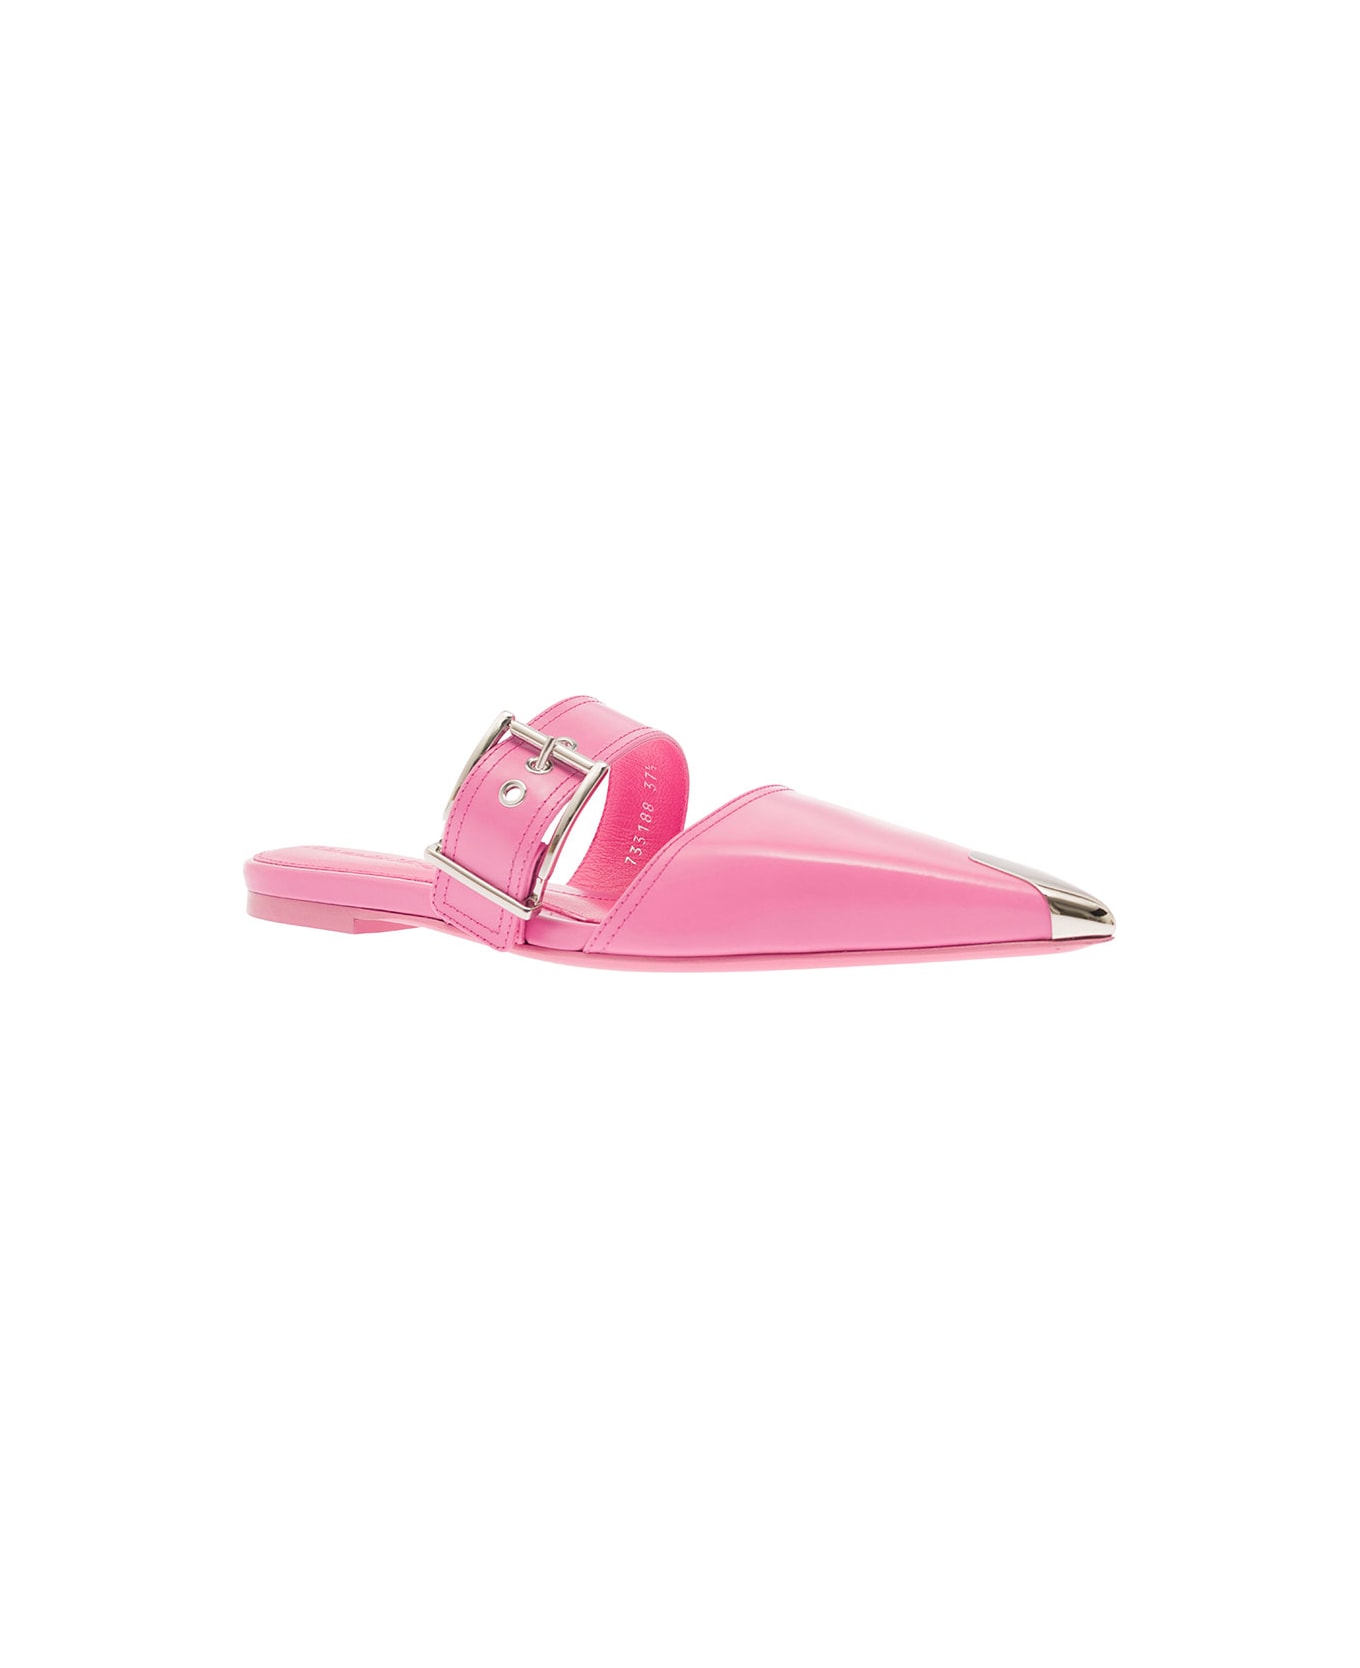 Alexander McQueen 'punk' Pink Mules With Metal Tip In Leather Woman - Pink